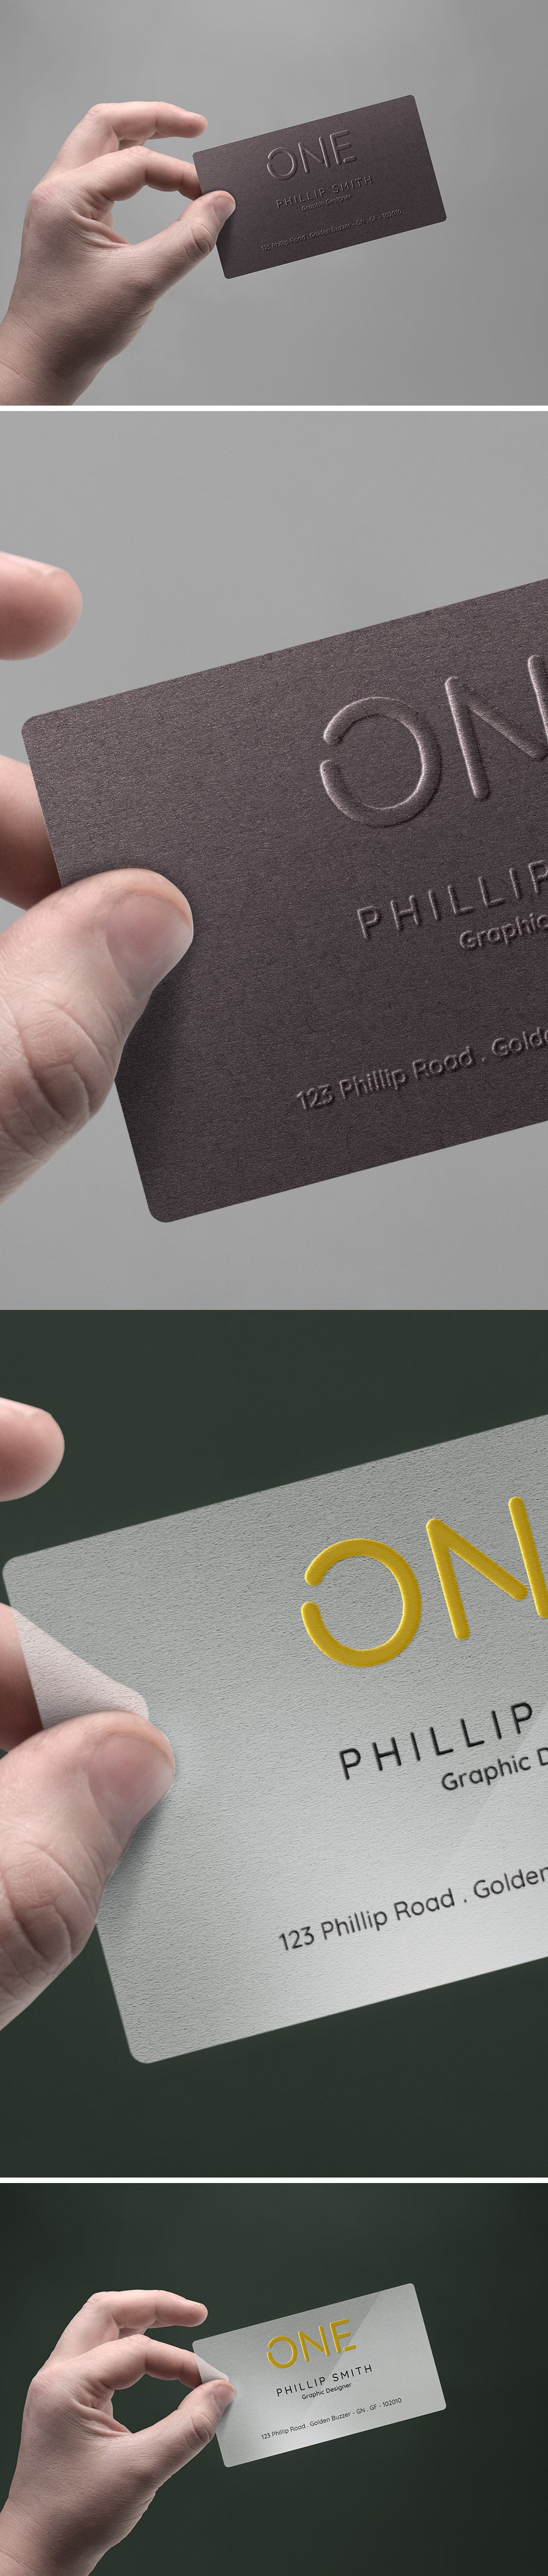 Free Realistic Business Card In Hand Mockup